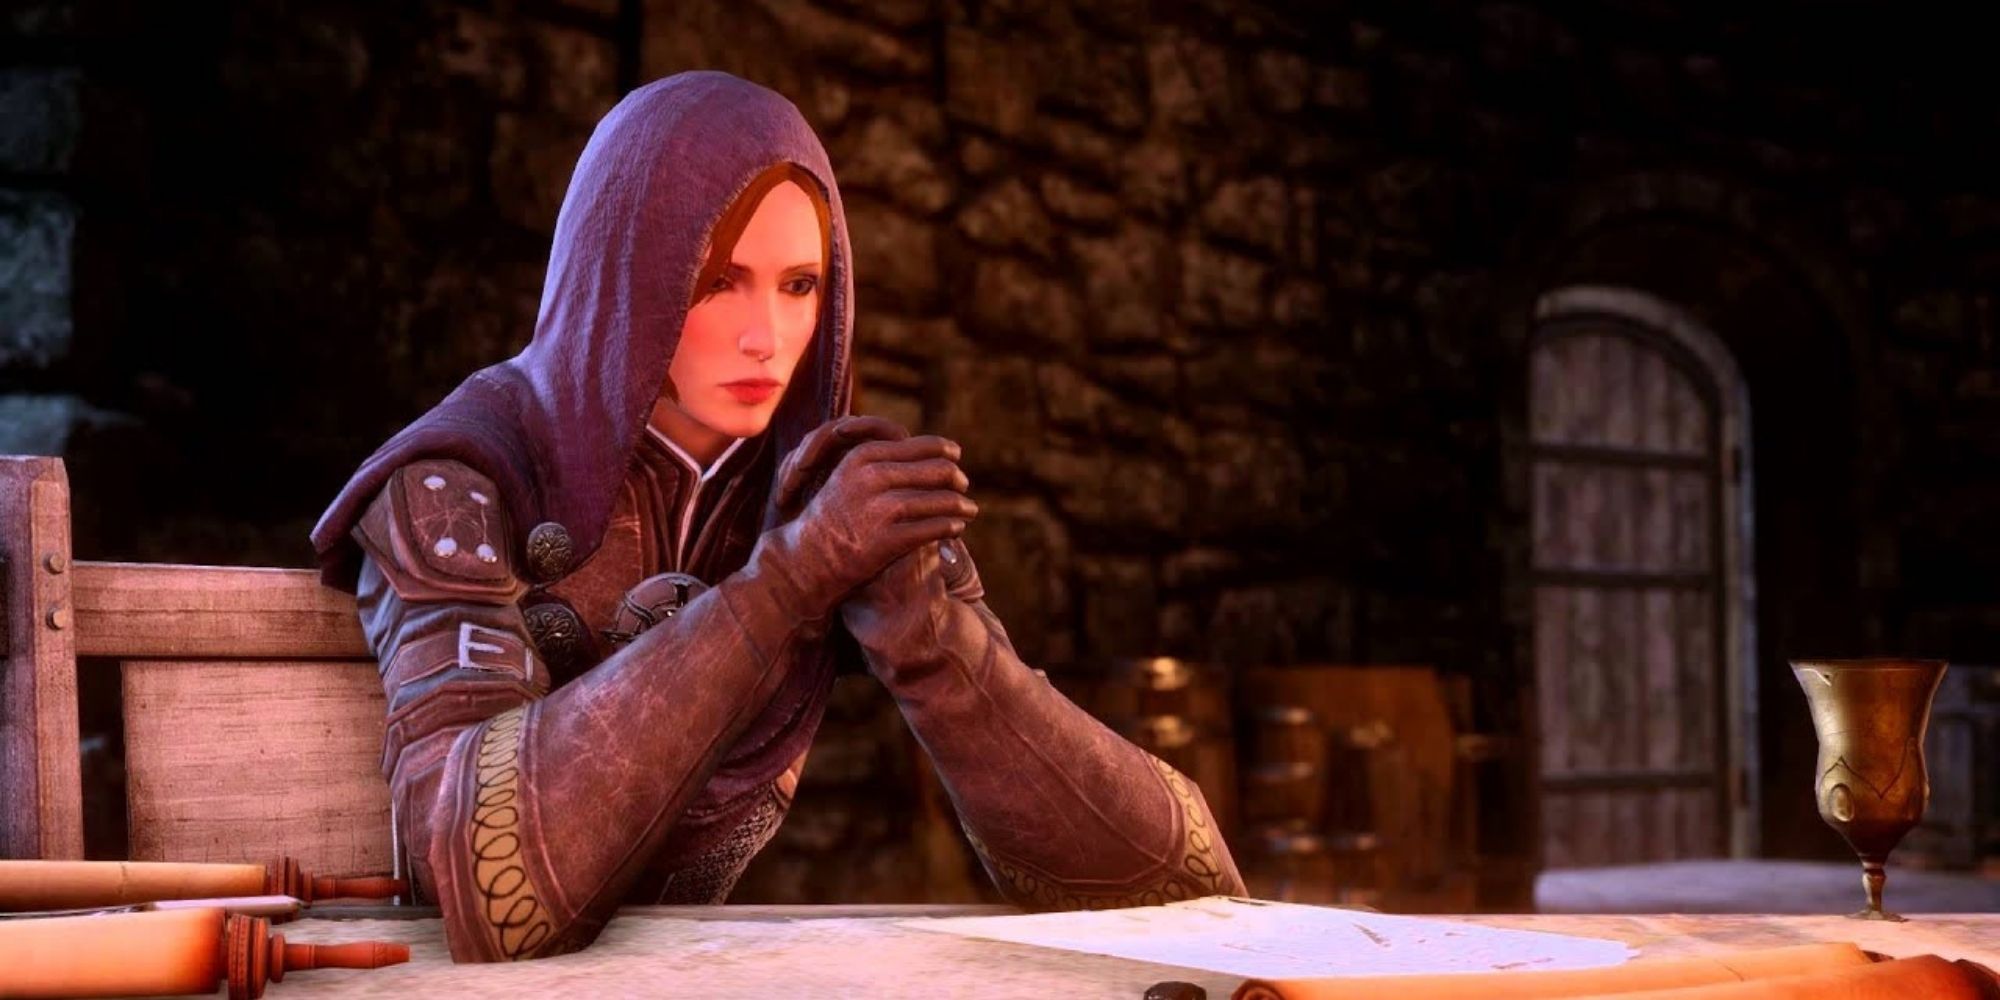 Dragon Age Inquisition - Leliana leaning over table in Skyhold